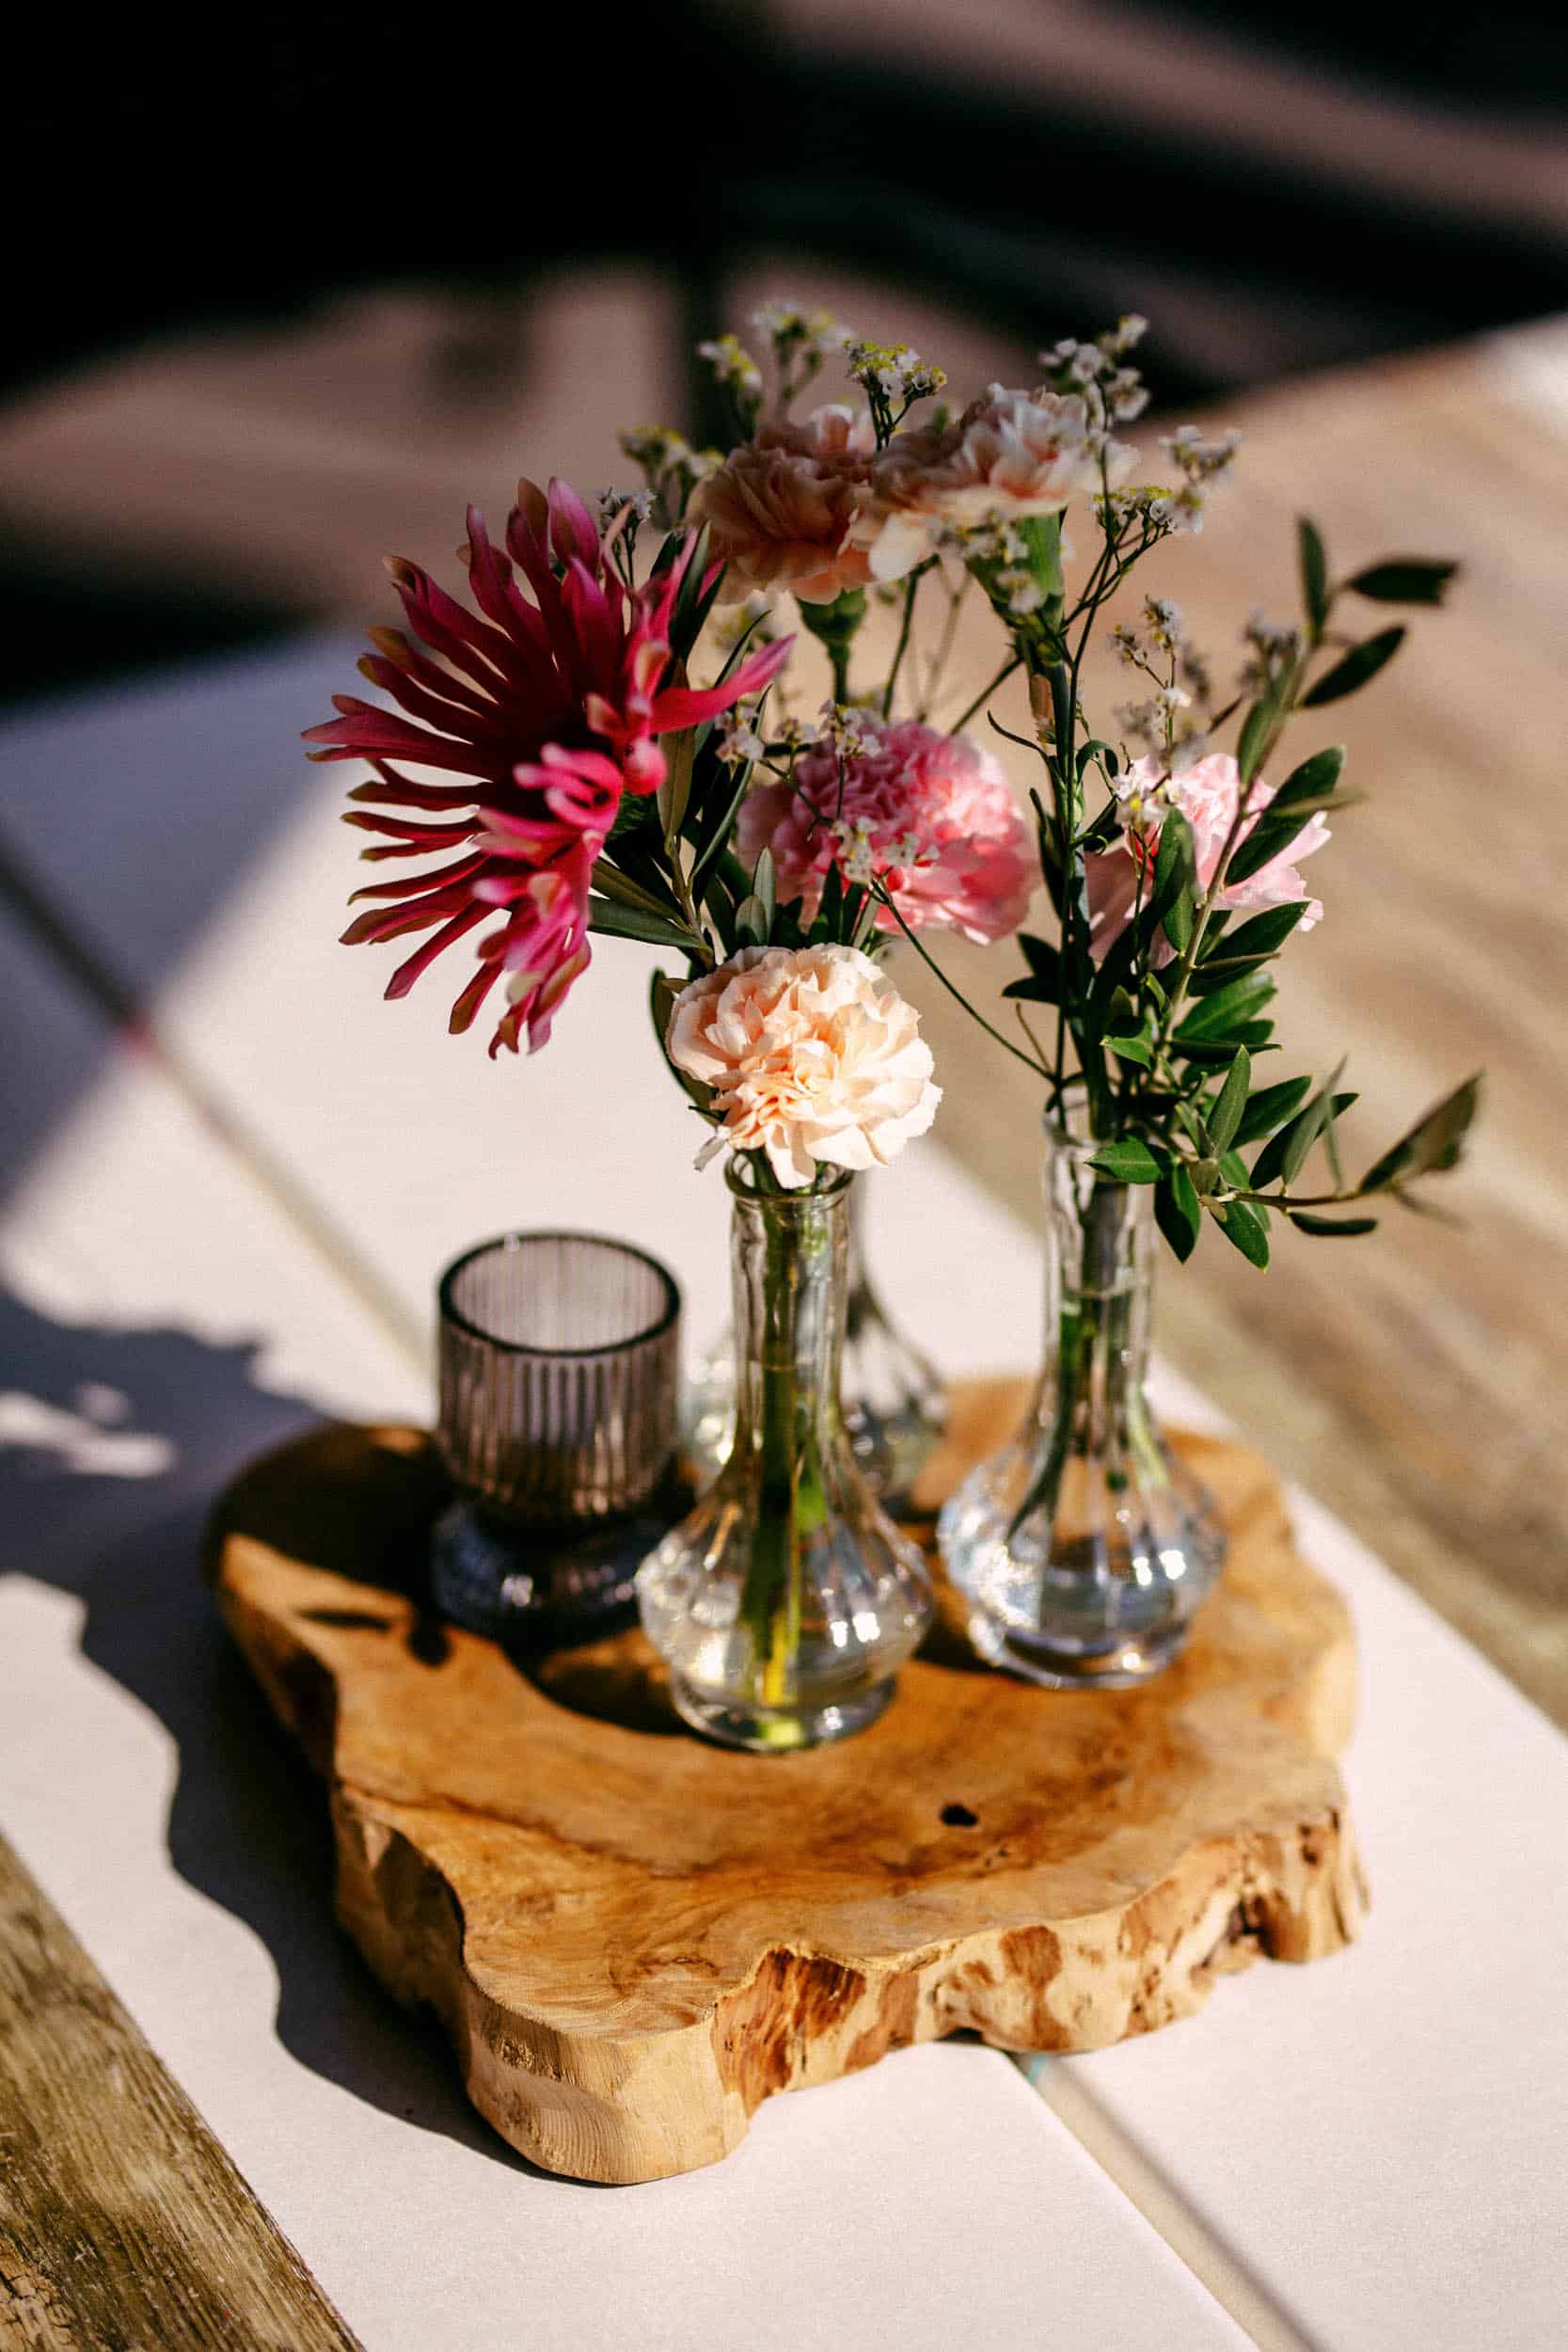 My torpedo shed is a wooden table with vases with flowers on it.